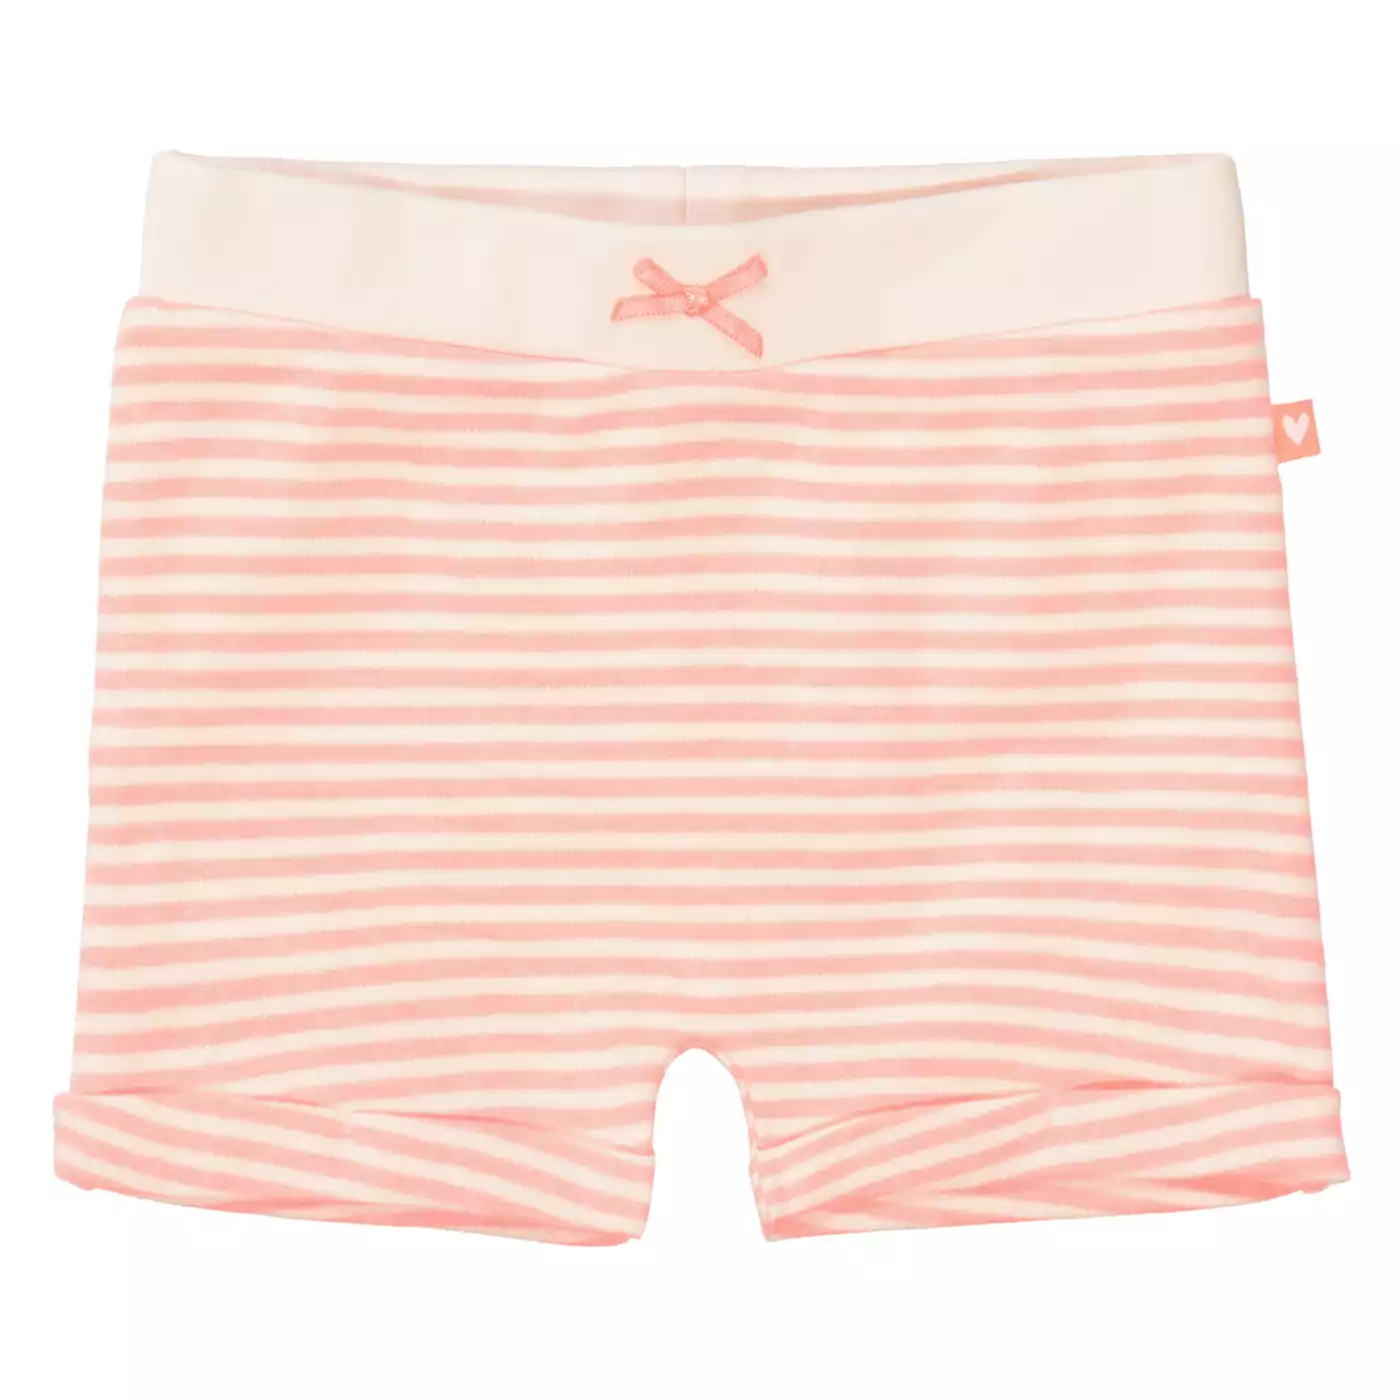 Shorts Neon Coral STACCATO Pink Rosa 2004580296103 3